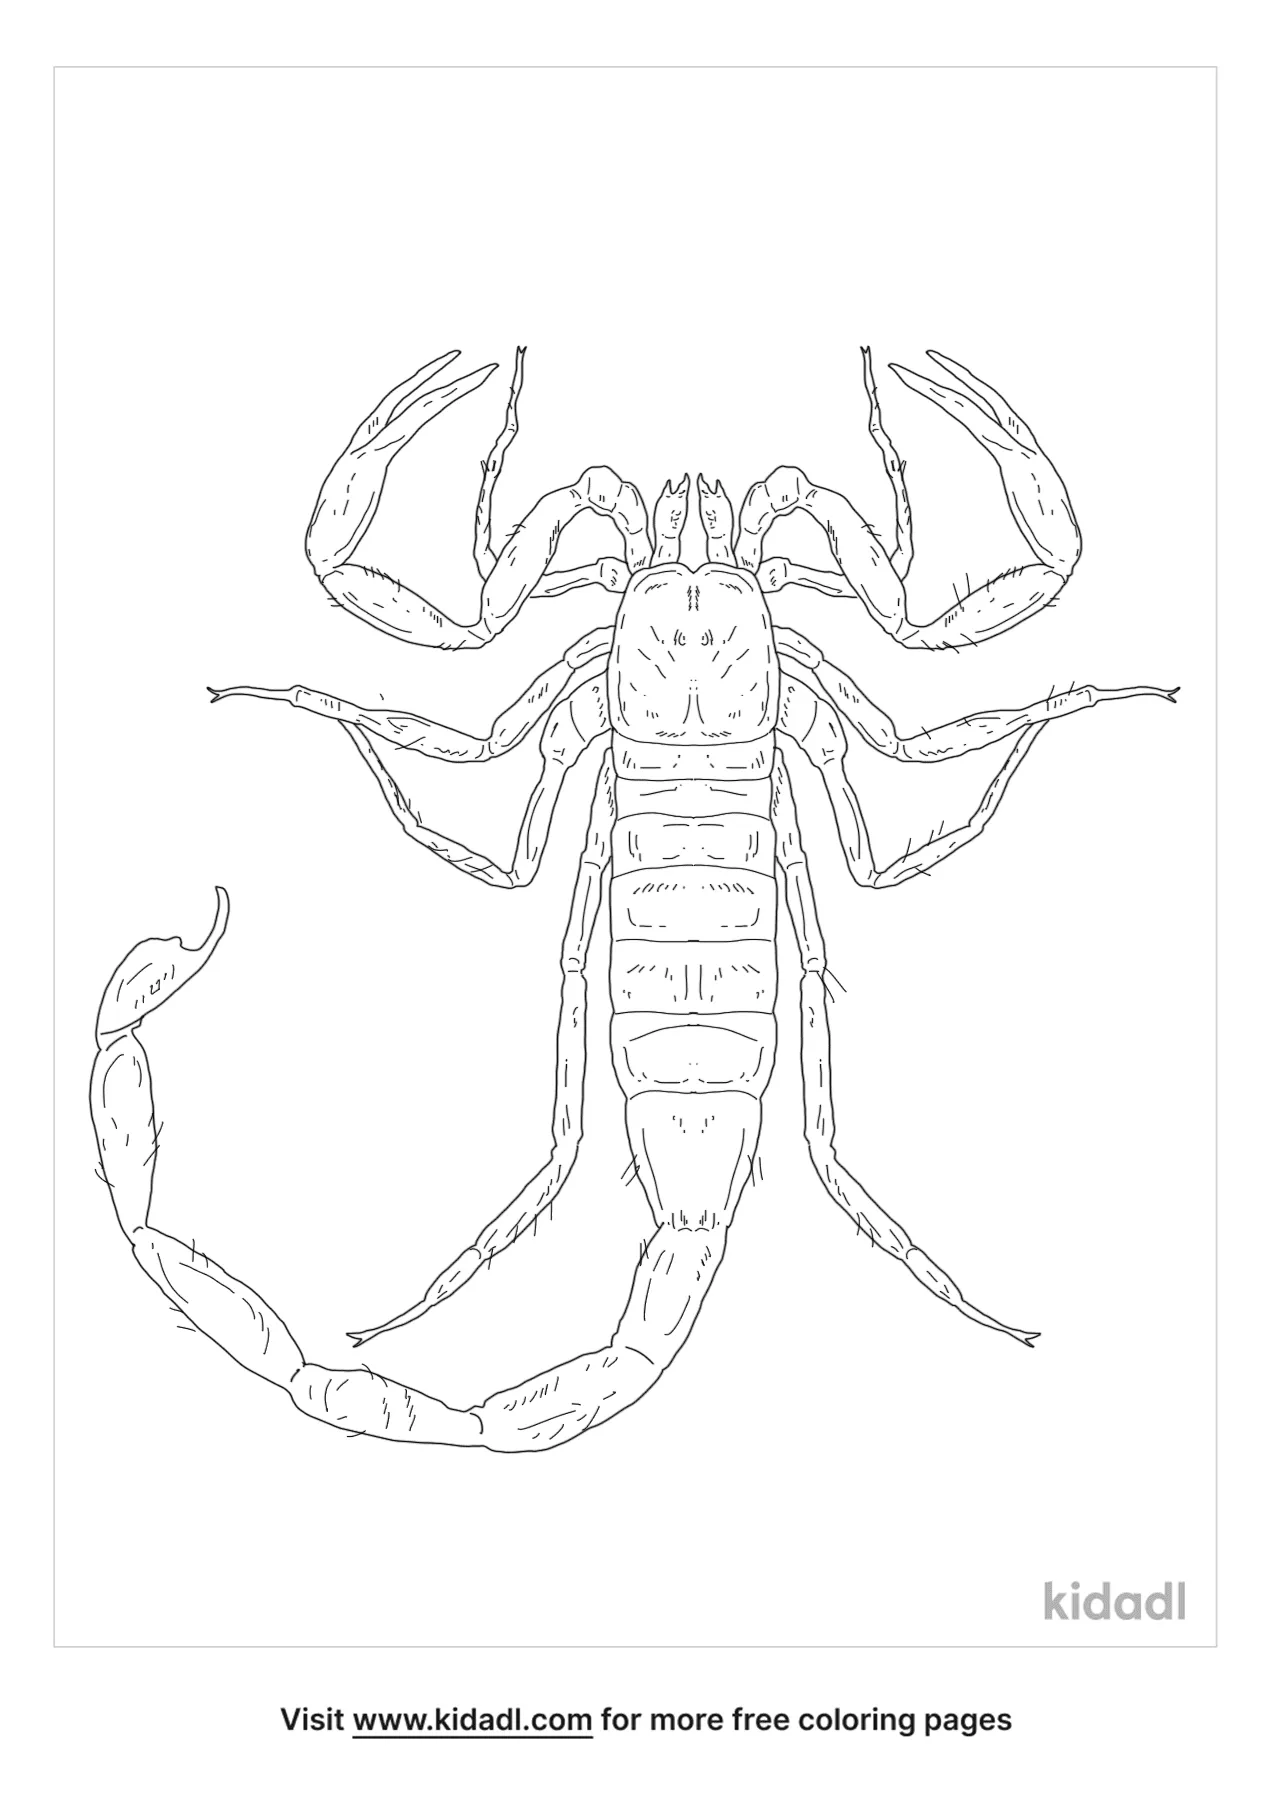 Download Deathstalker Scorpion Coloring Pages Free Animals Coloring Pages Kidadl